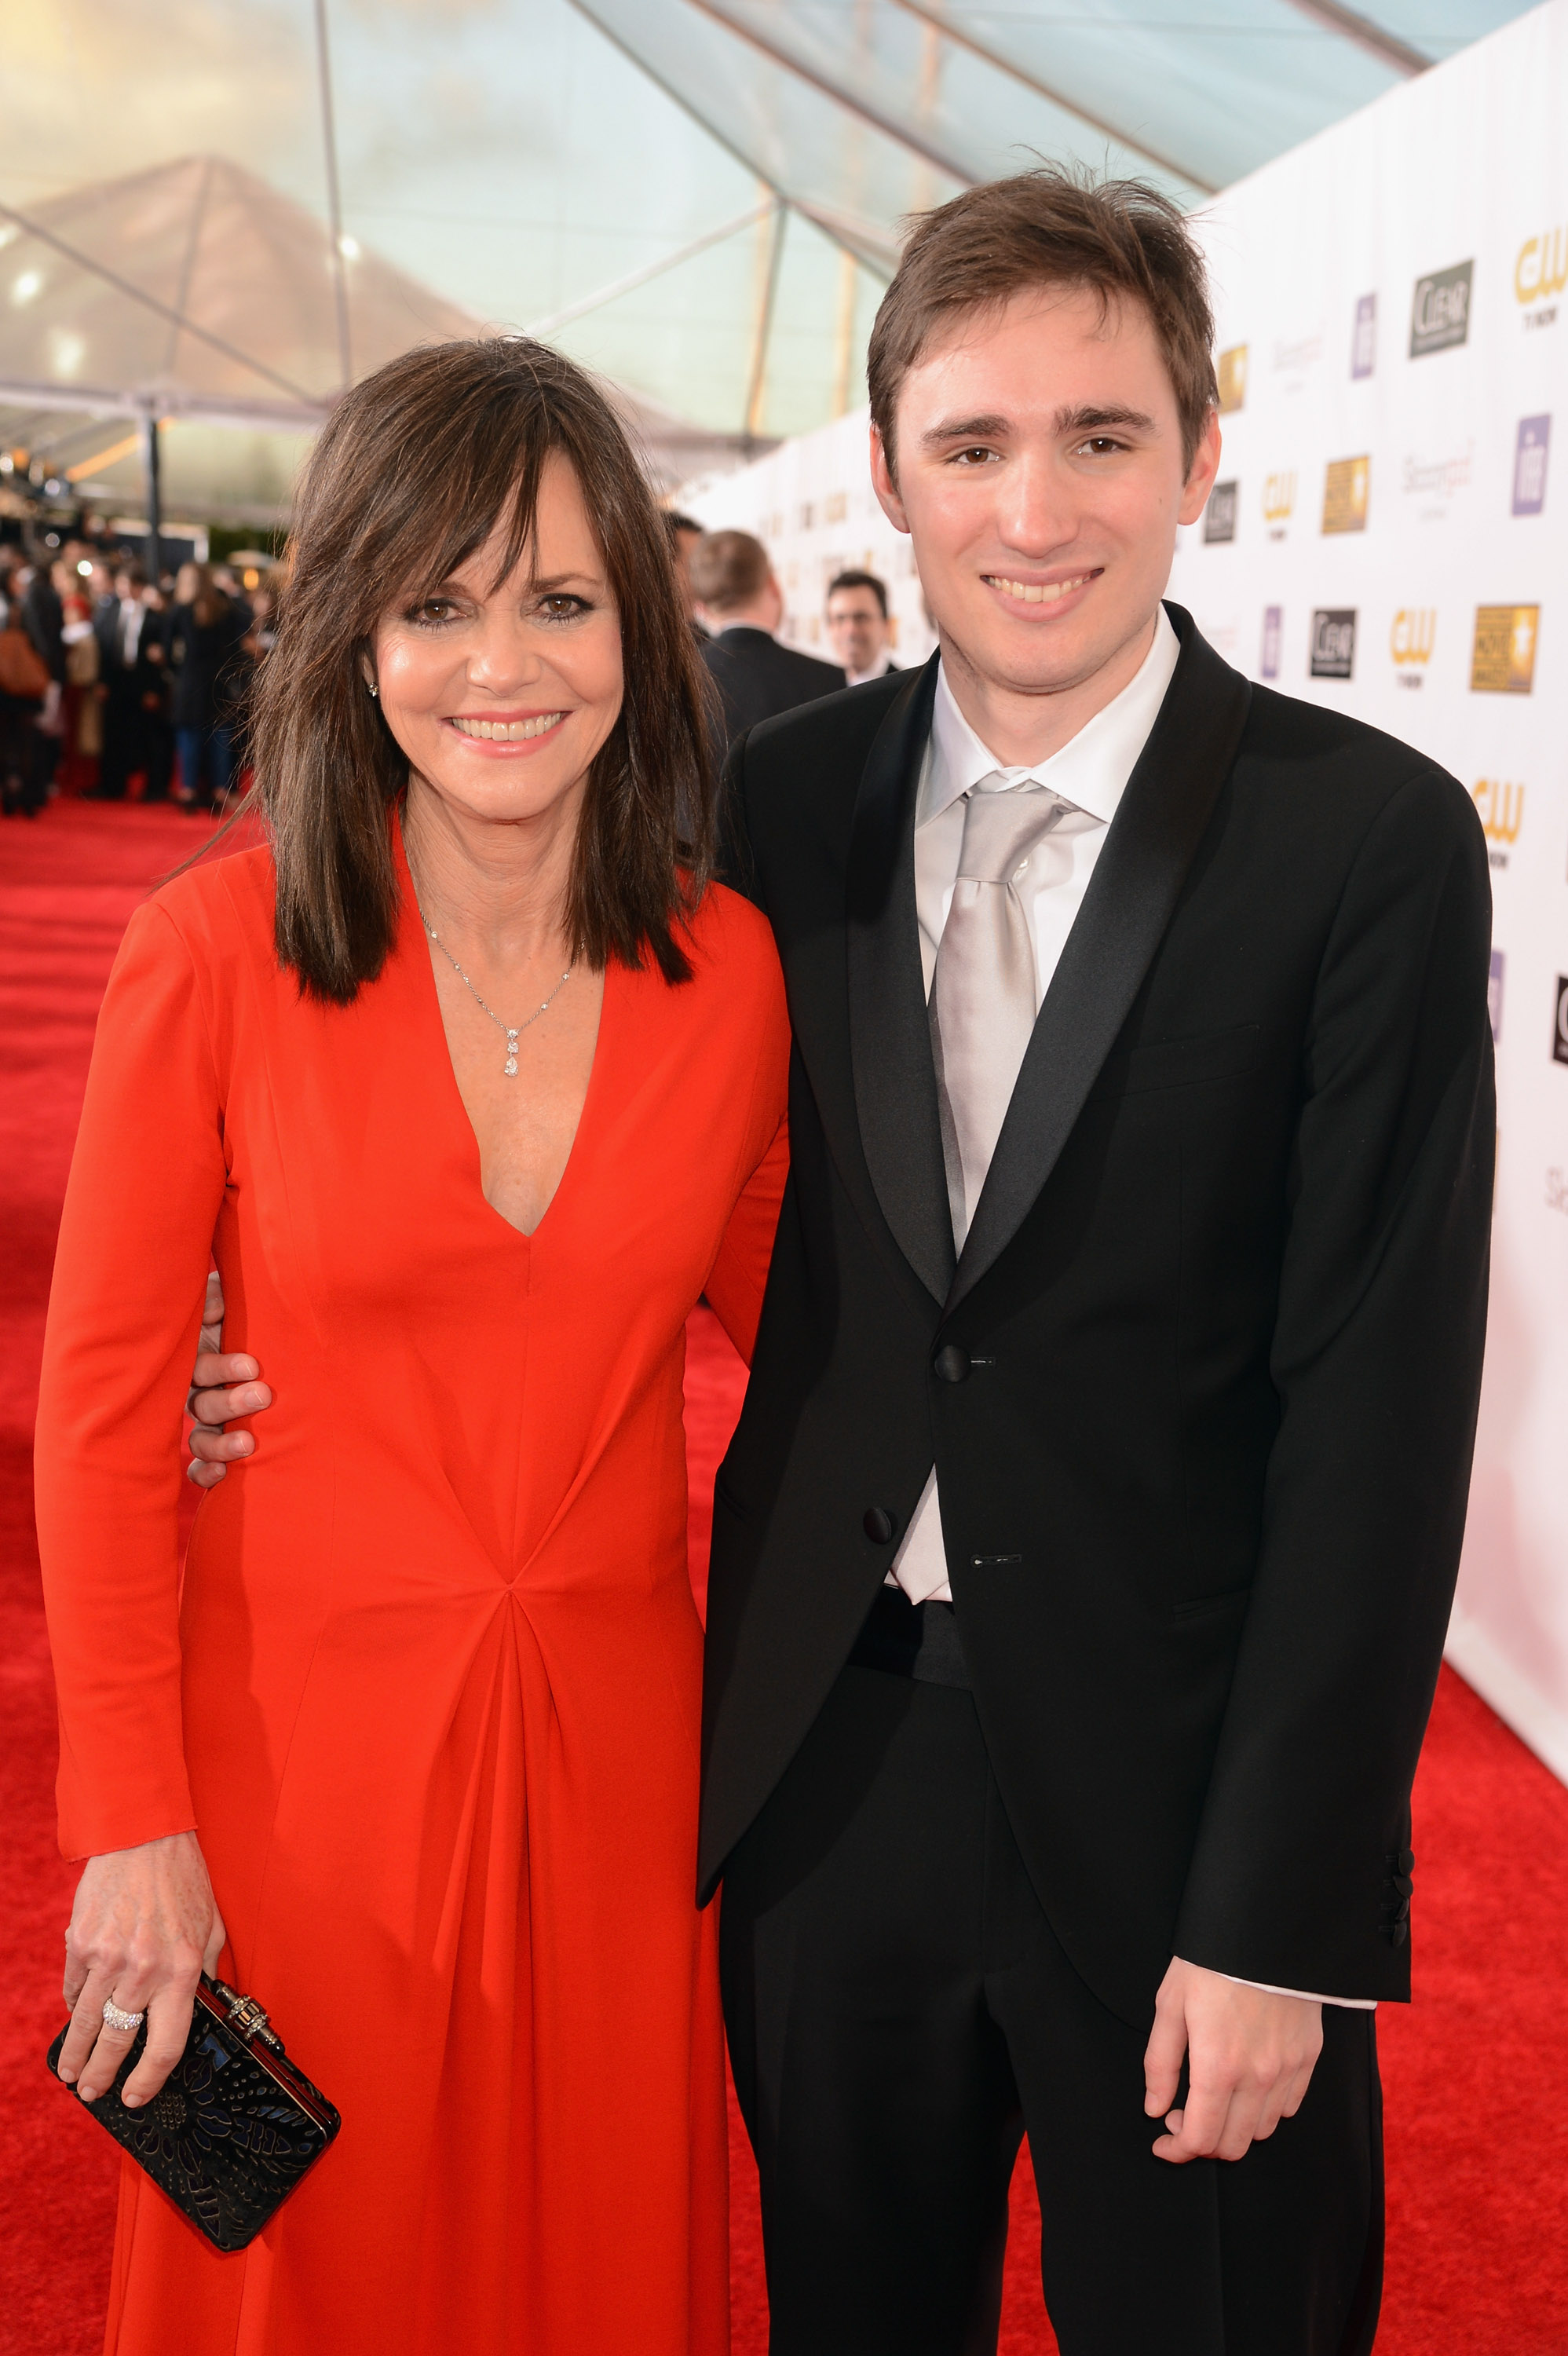 Sally Field and Samuel Greisman at the 18th Annual Critics' Choice Movie Awards in Santa Monica, California on January 10, 2013 | Source: Getty Images